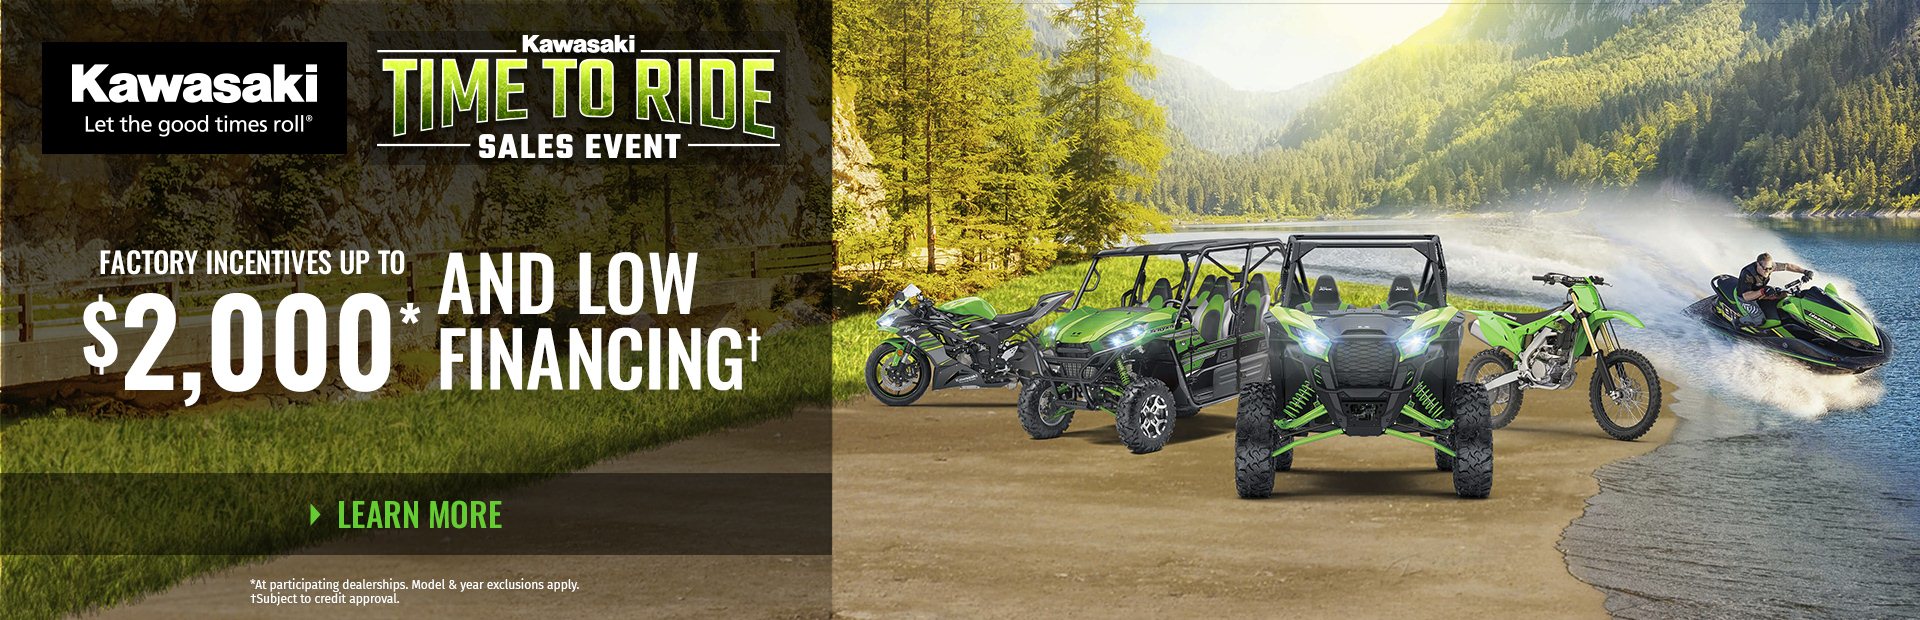 Time To Ride Sales Event at Power World Sports, Granby, CO 80446